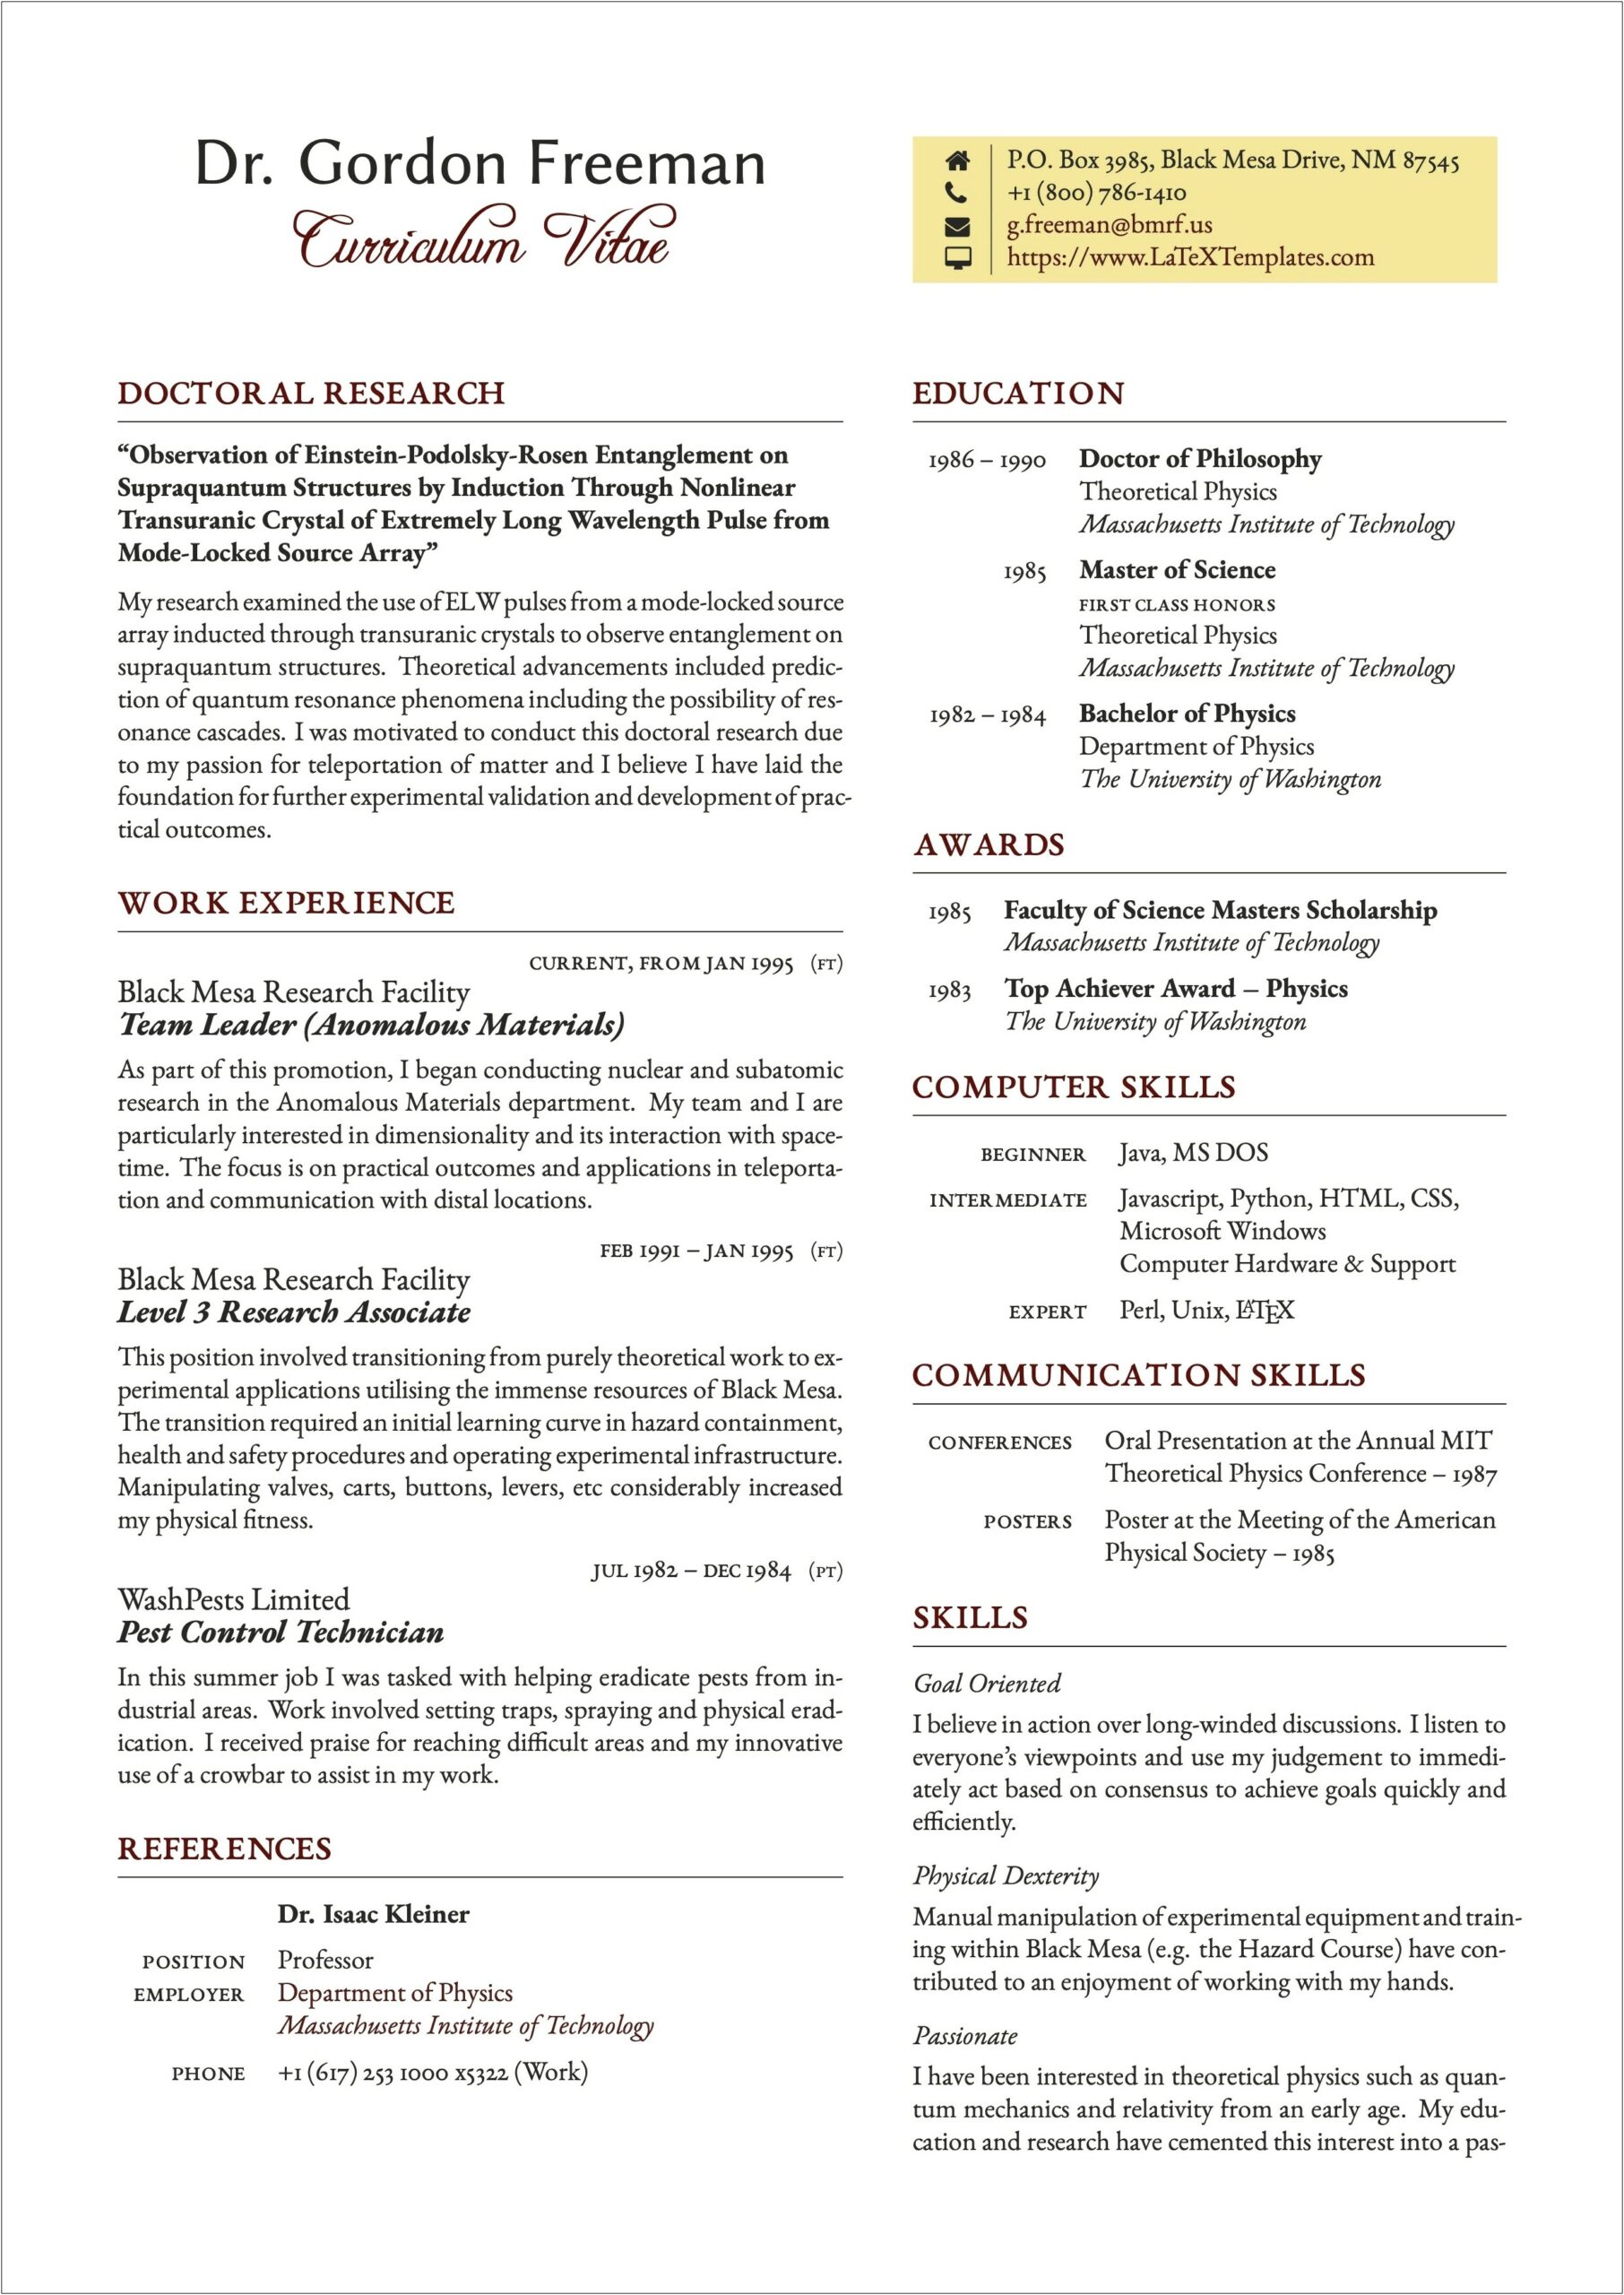 Sample Resume Little Experience Information Technology